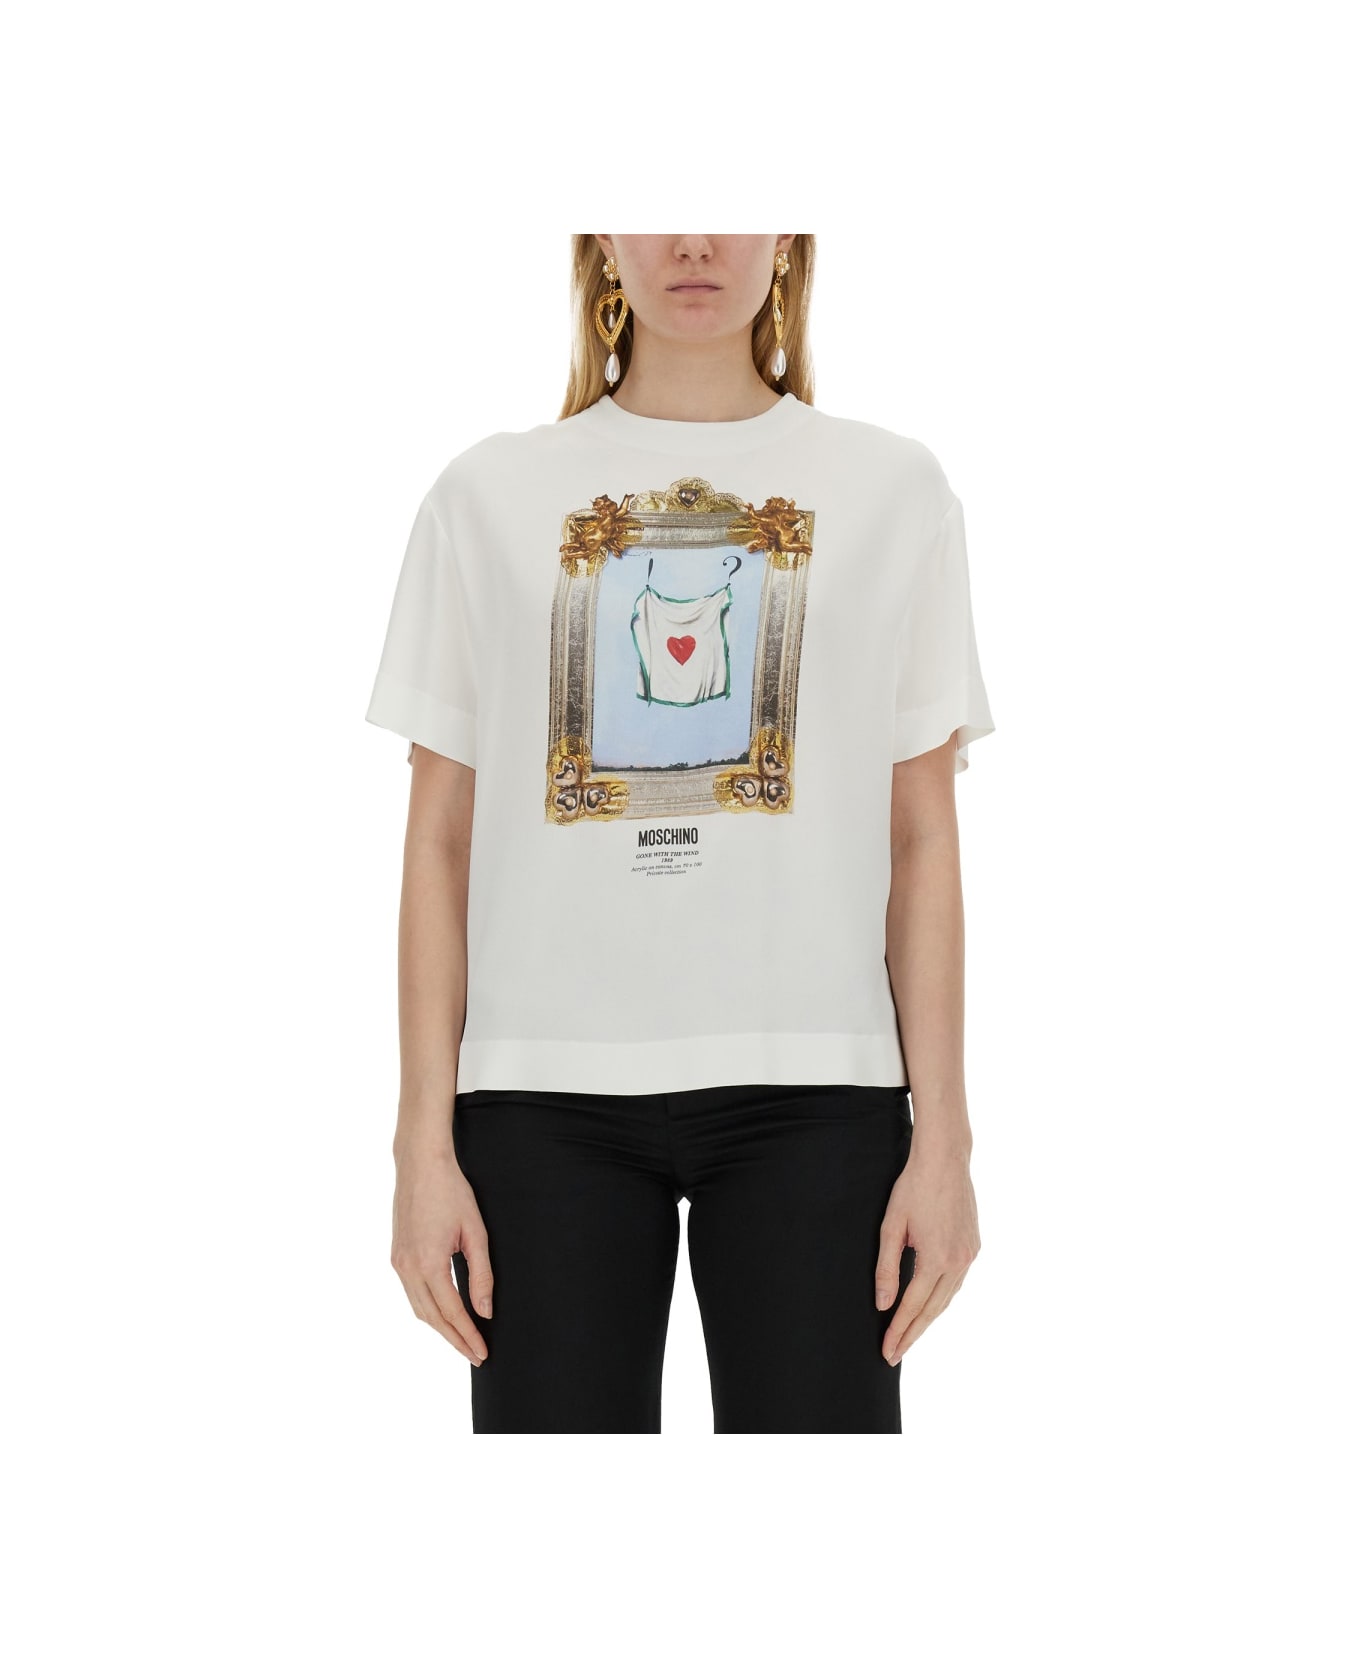 Moschino "gone With The Wind" T-shirt - WHITE